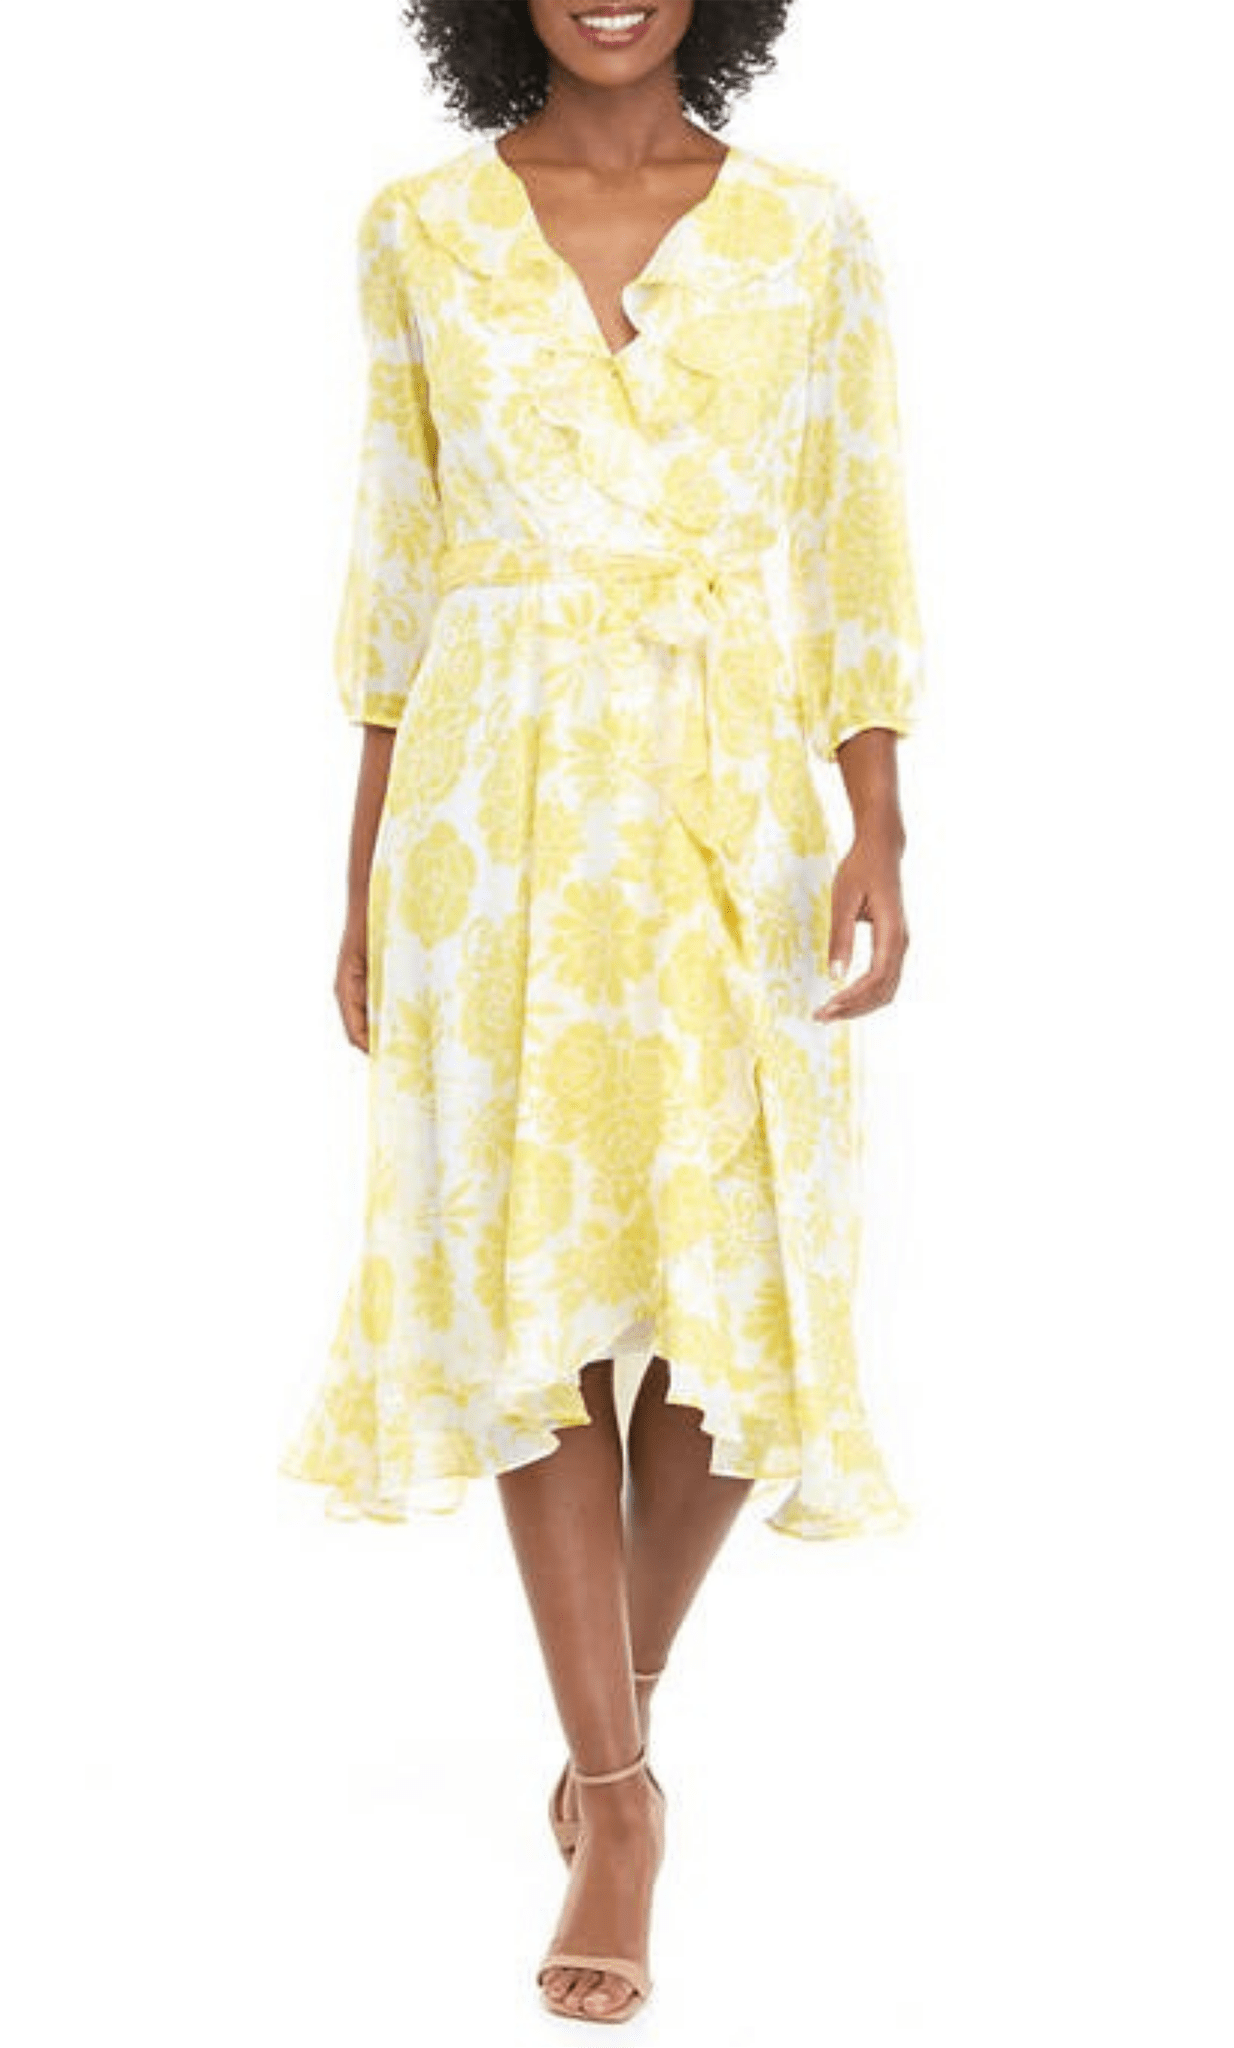 Maison Tara 58399MA - Ruffled V-Neck Floral Cocktail Dress Special Occasion Dress 0 / Ivory Daffodil